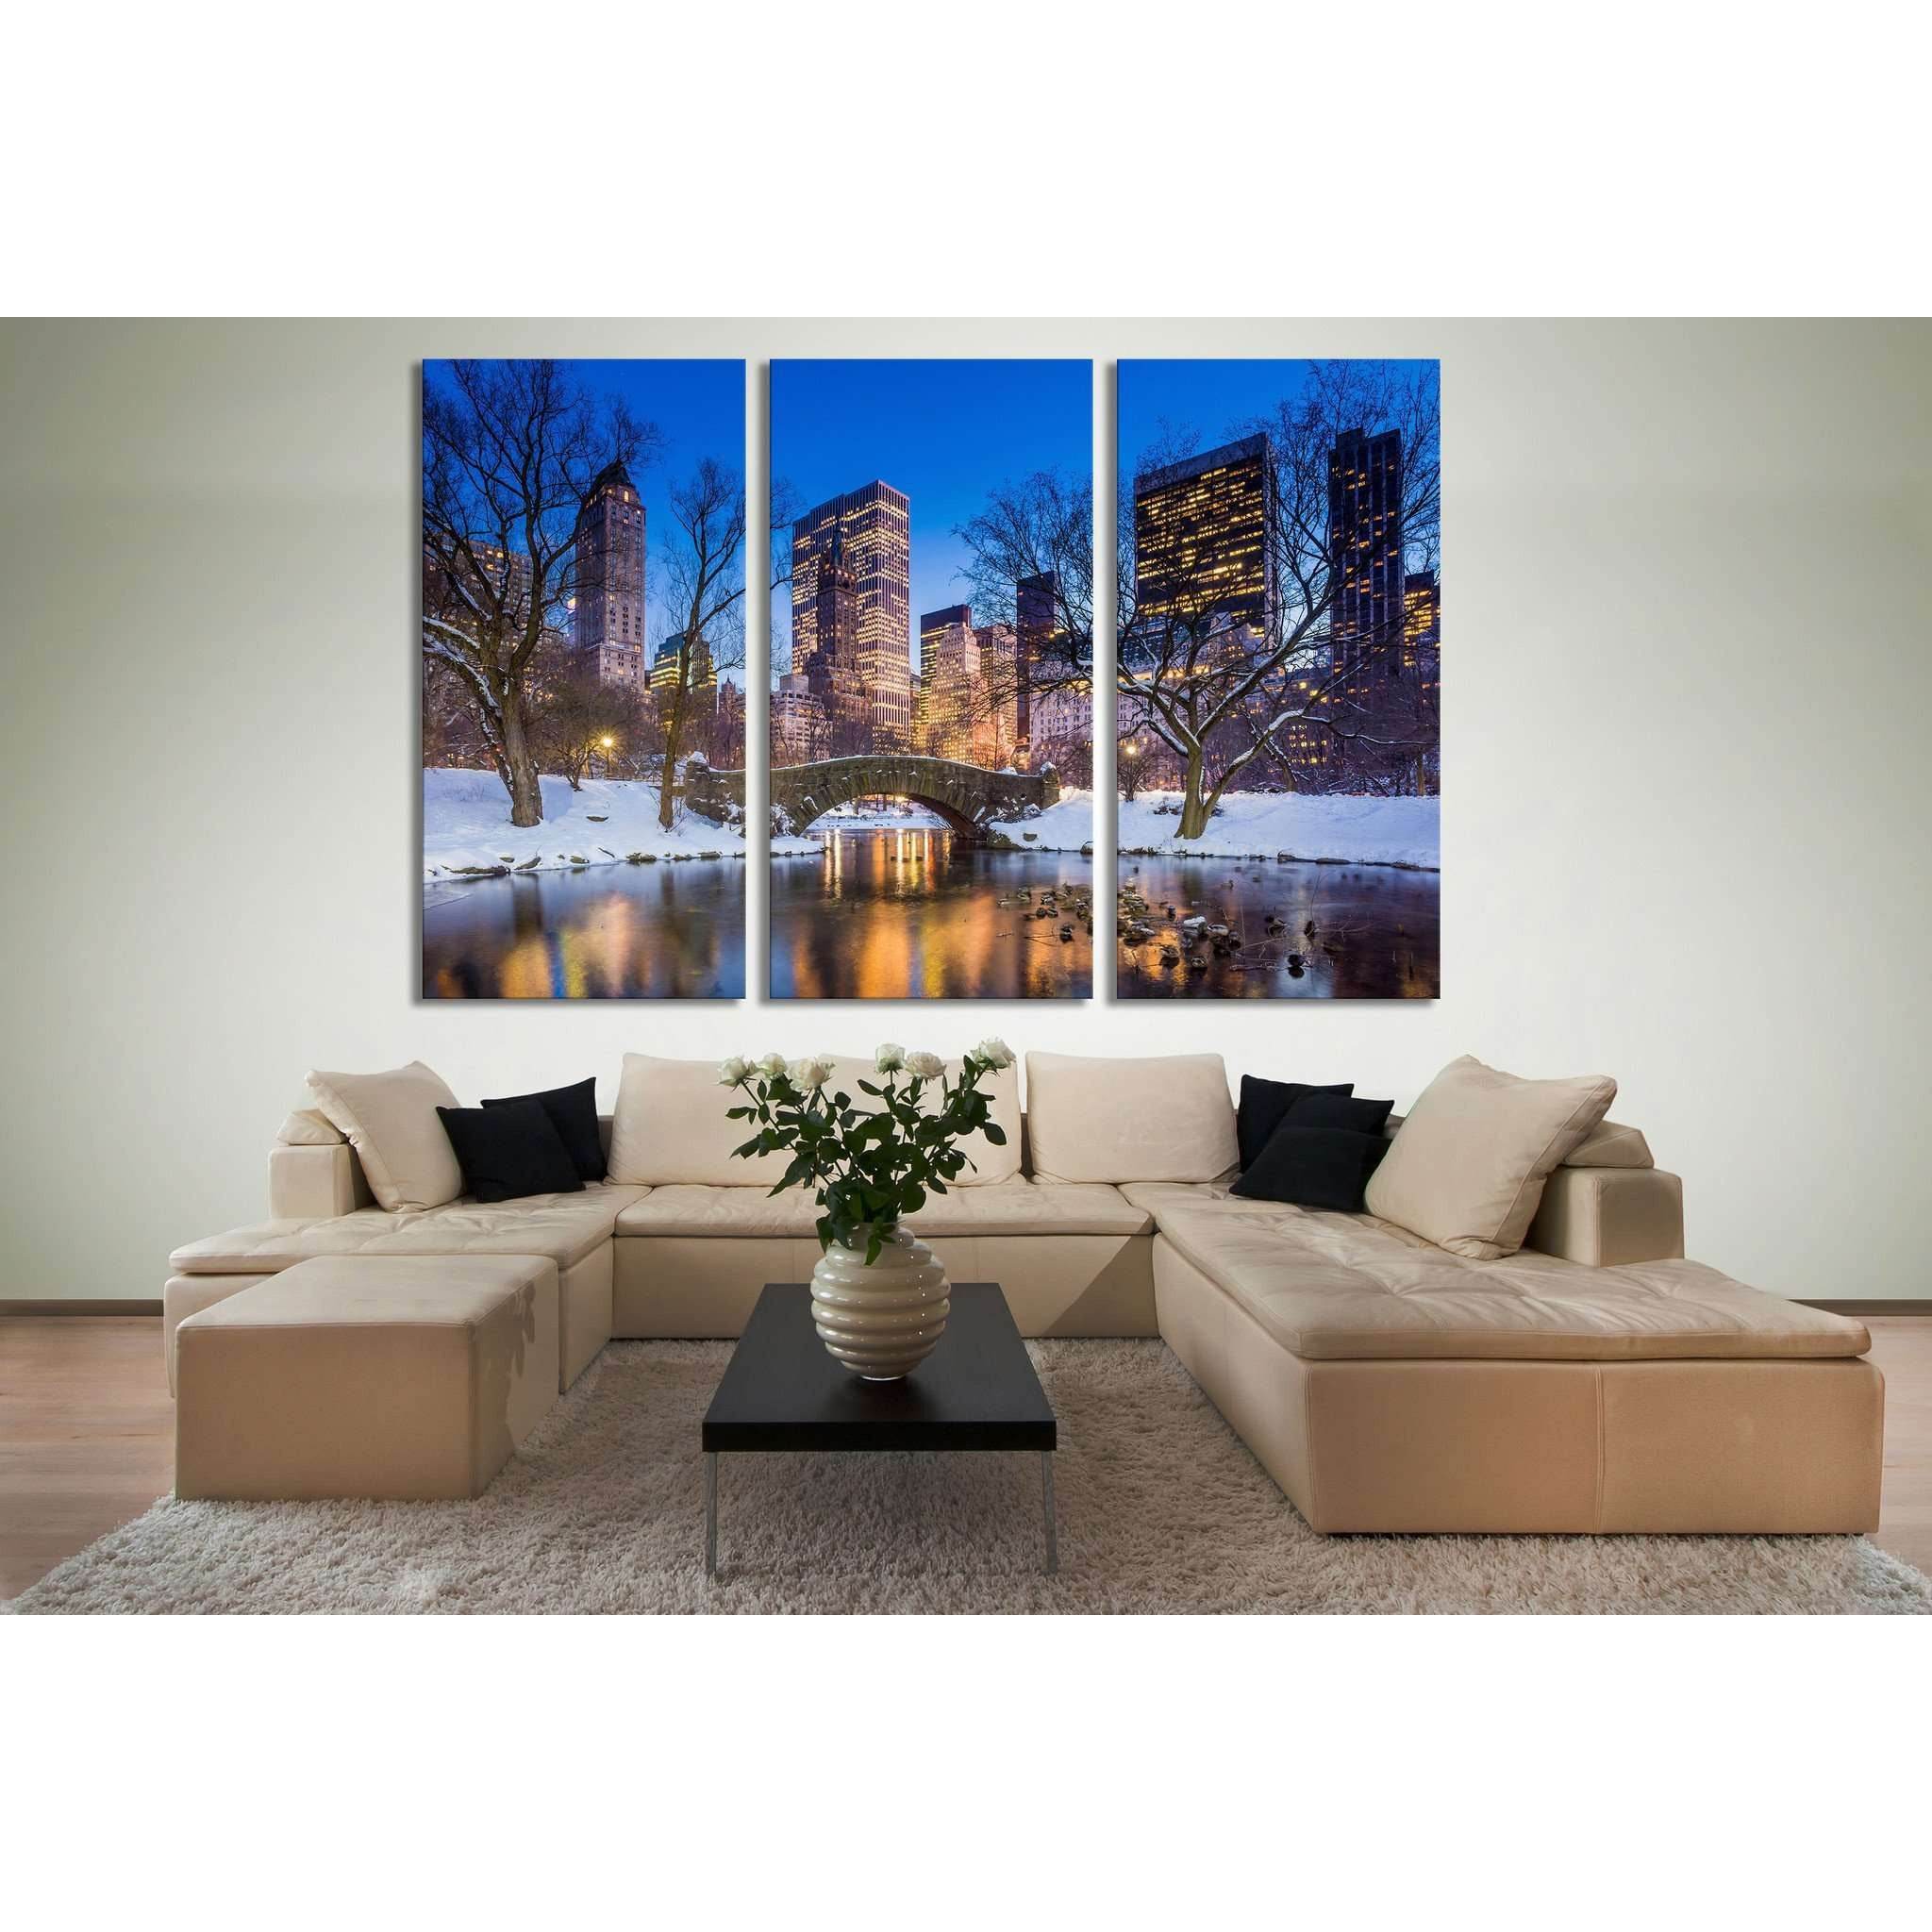 New York Central Park №617 Ready to Hang Canvas Print